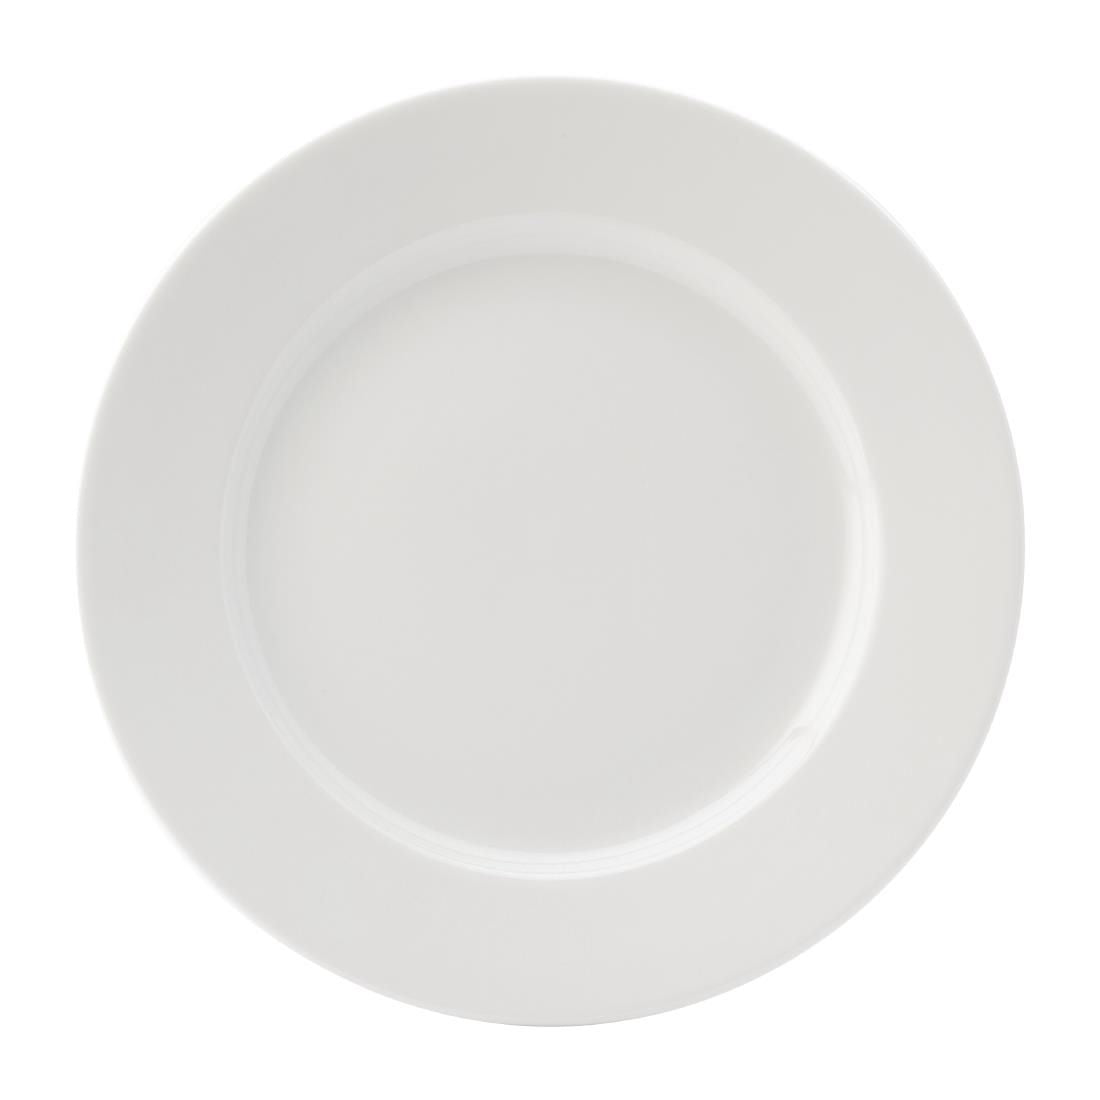 DY344 Utopia Titan Winged Plates White 260mm (Pack of 6)